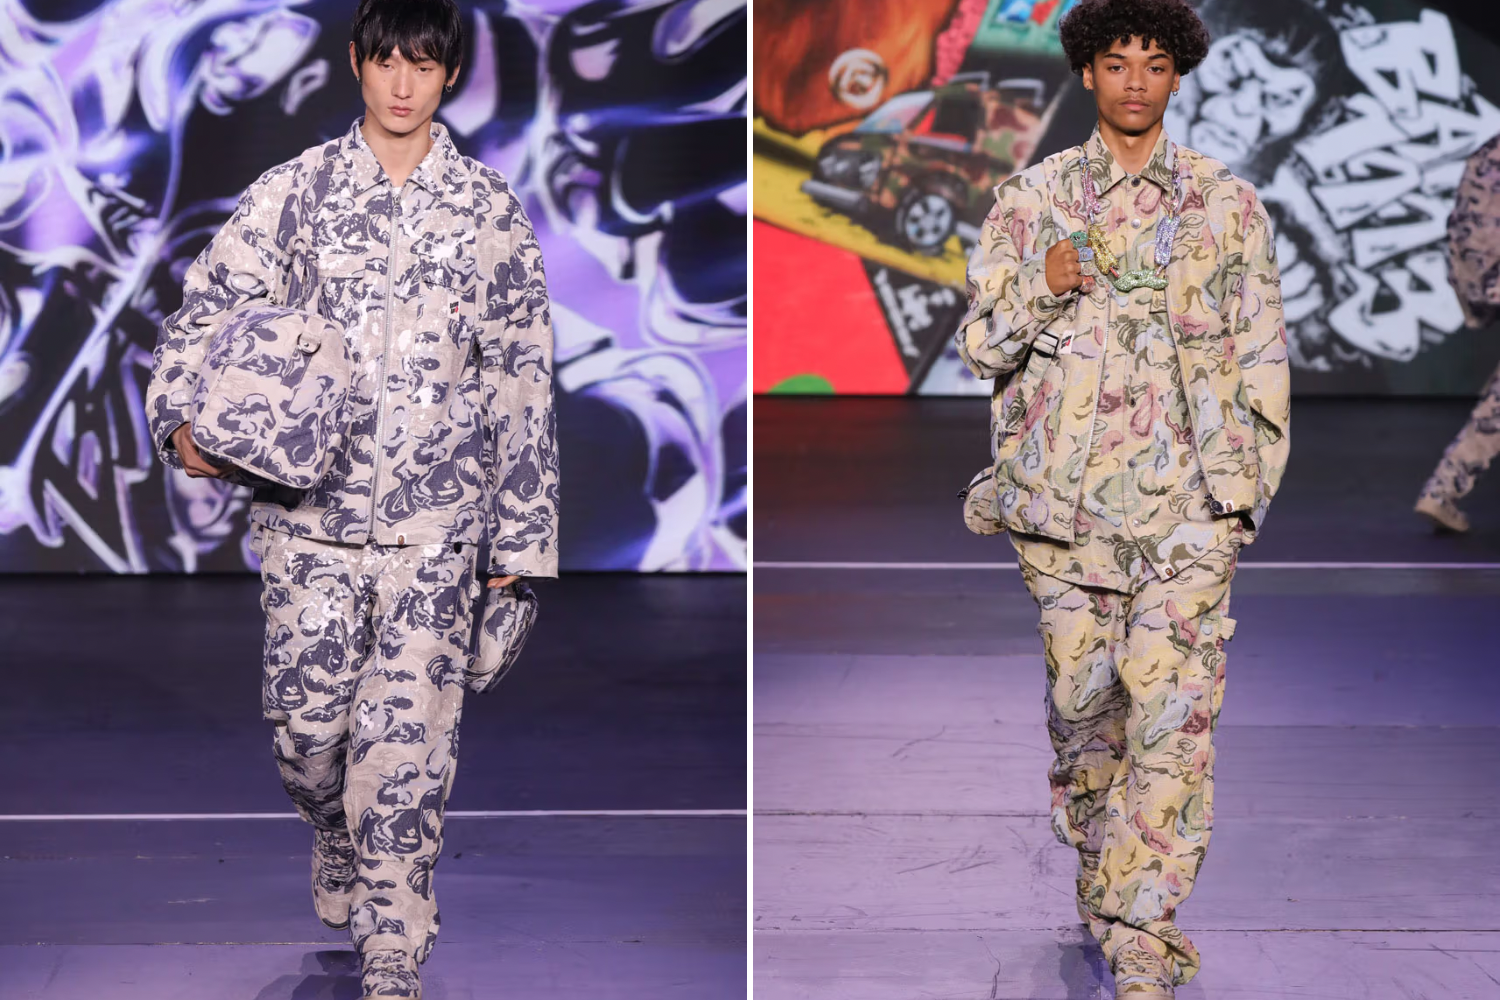 Bape 30th Anniversary Runway Show in NYC: Coi Leray, Lil Baby and More – WWD